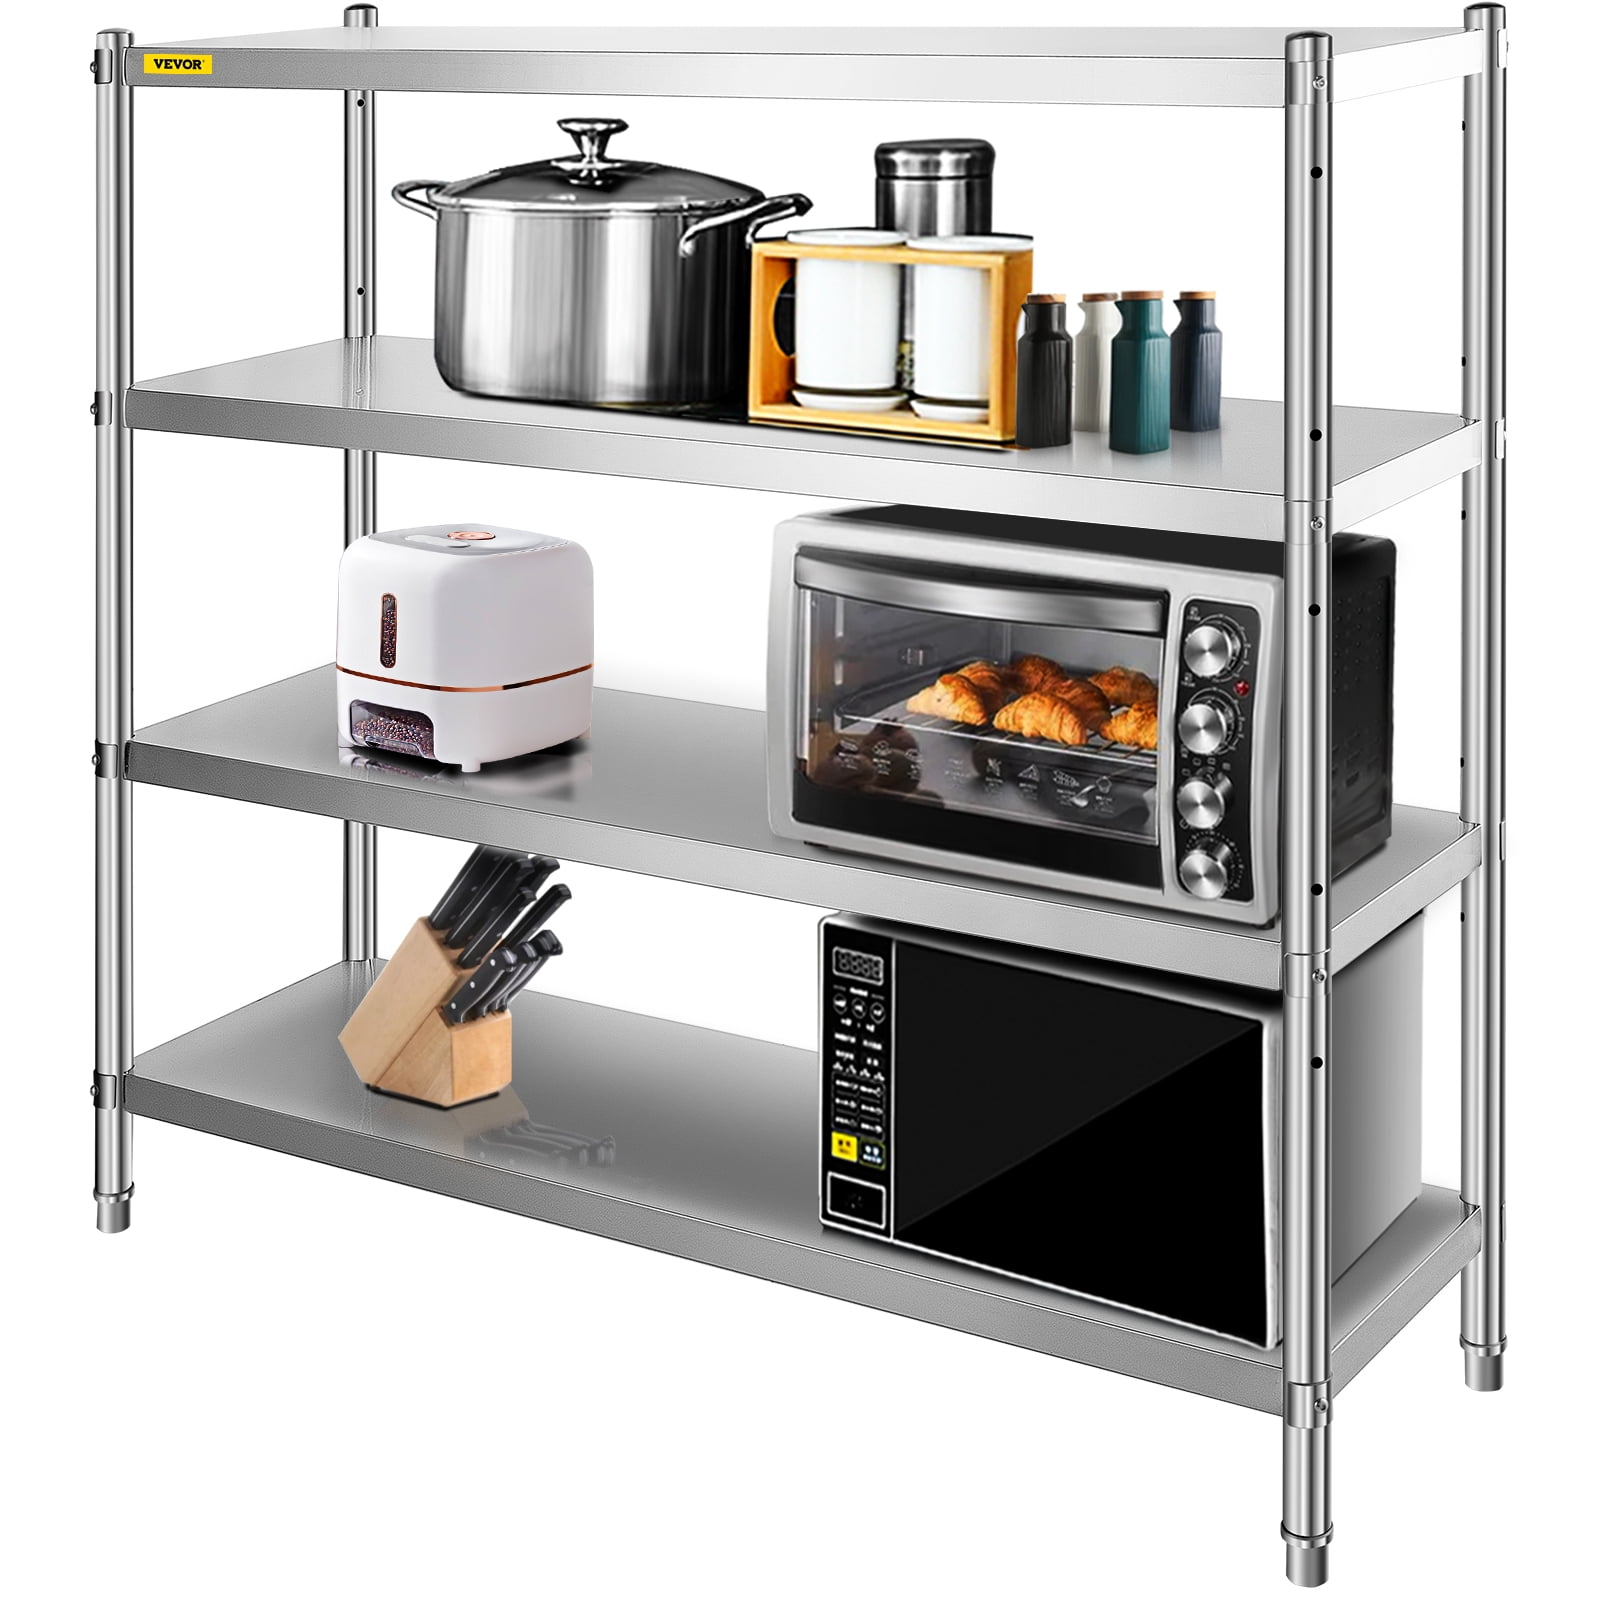 Home kitchen office Garage 3 Shelf Chrome Plated Stainless Steel Shelving Unit 